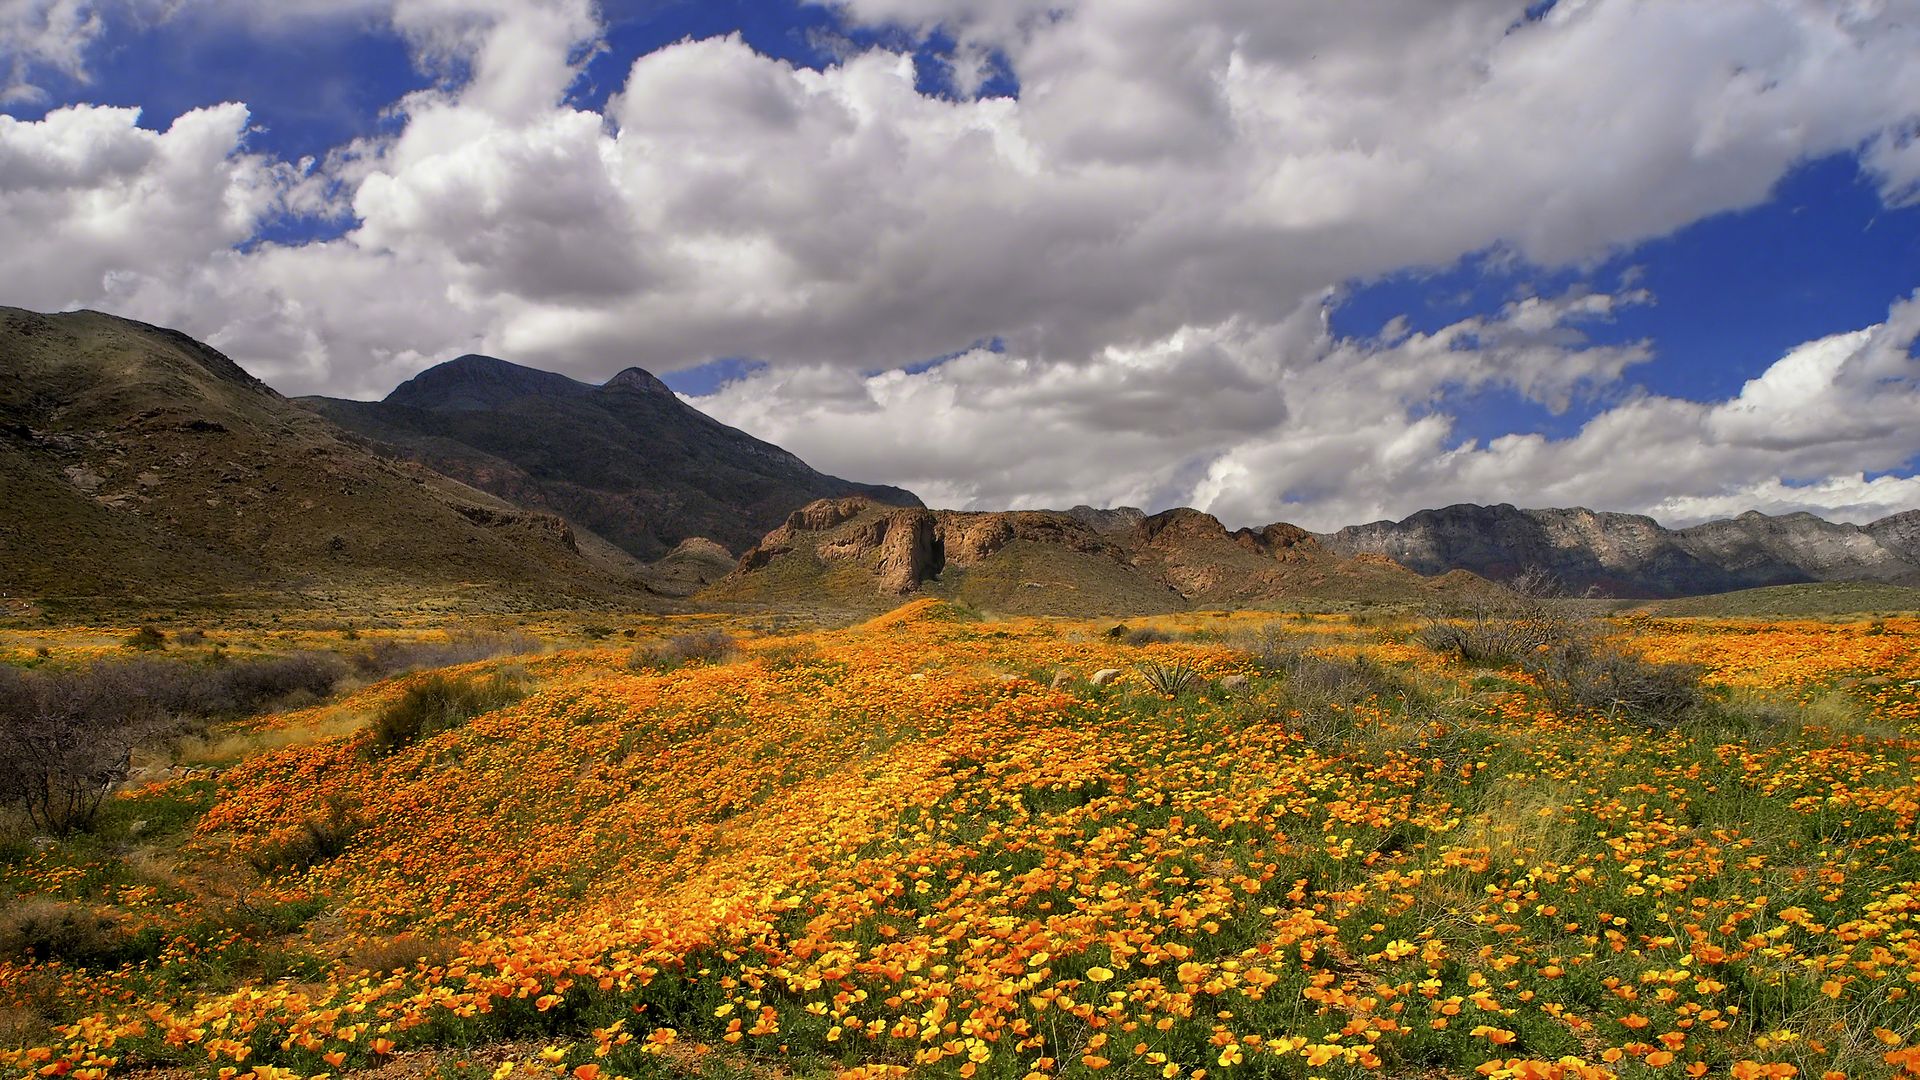 Castner Range in August 2021 after a rare rain storm as yellow plants bloom. 